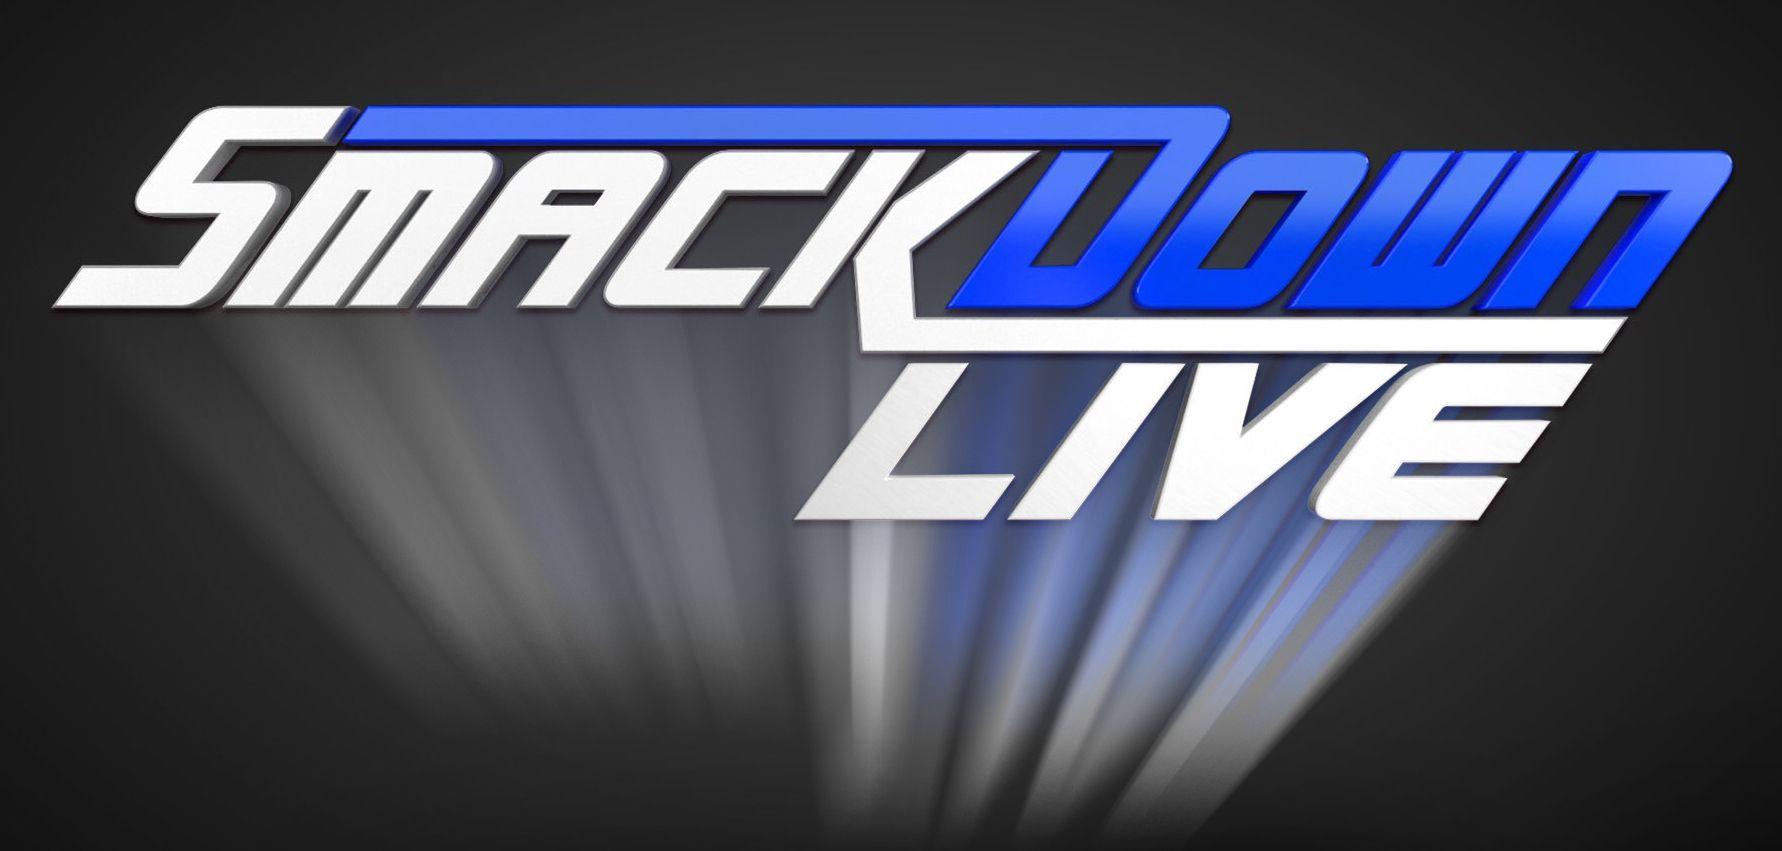 Viewership Up For WWE Smackdown With AJ Styles vs Dolph Ziggler